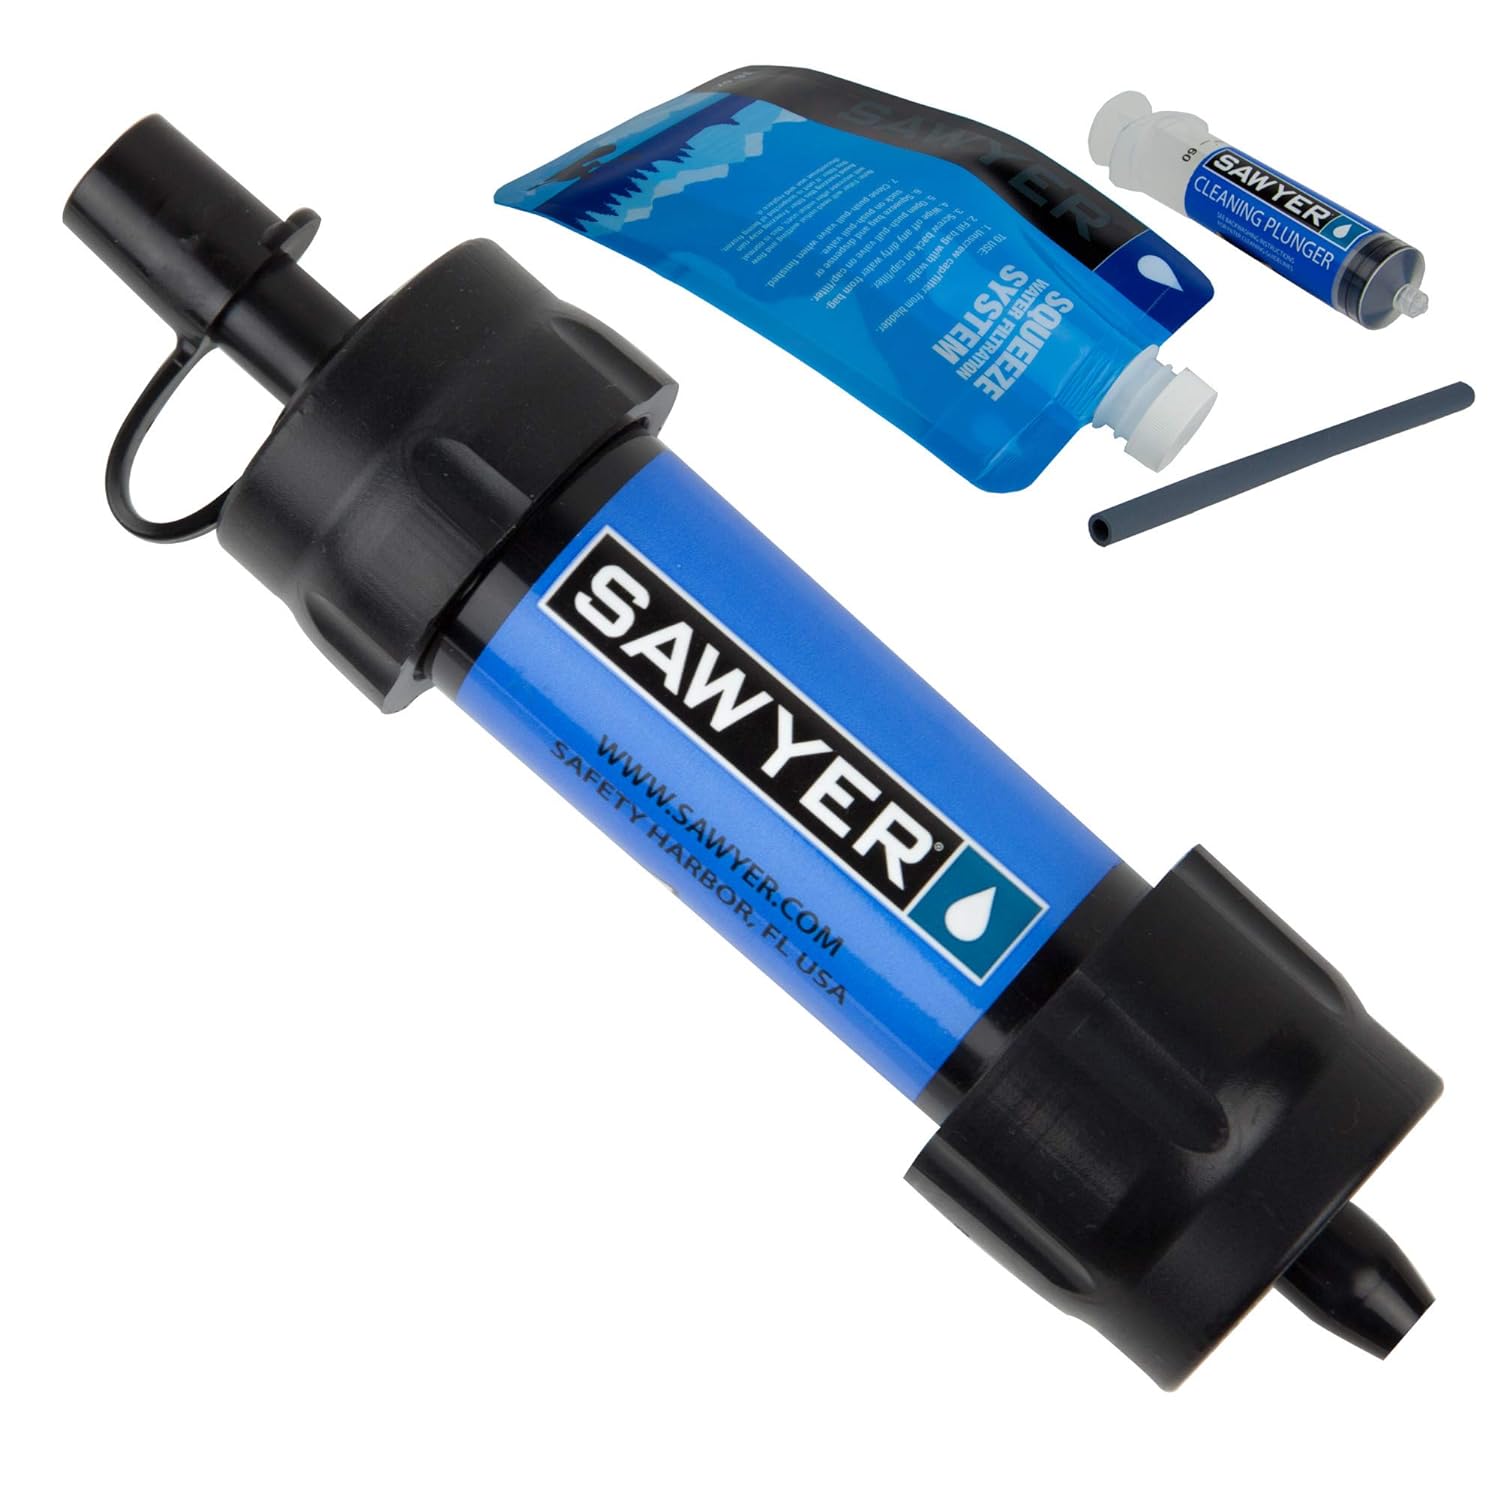 A Portable Water Filter by SAWYER, showcased with its blue cylindrical body and black caps on both ends.